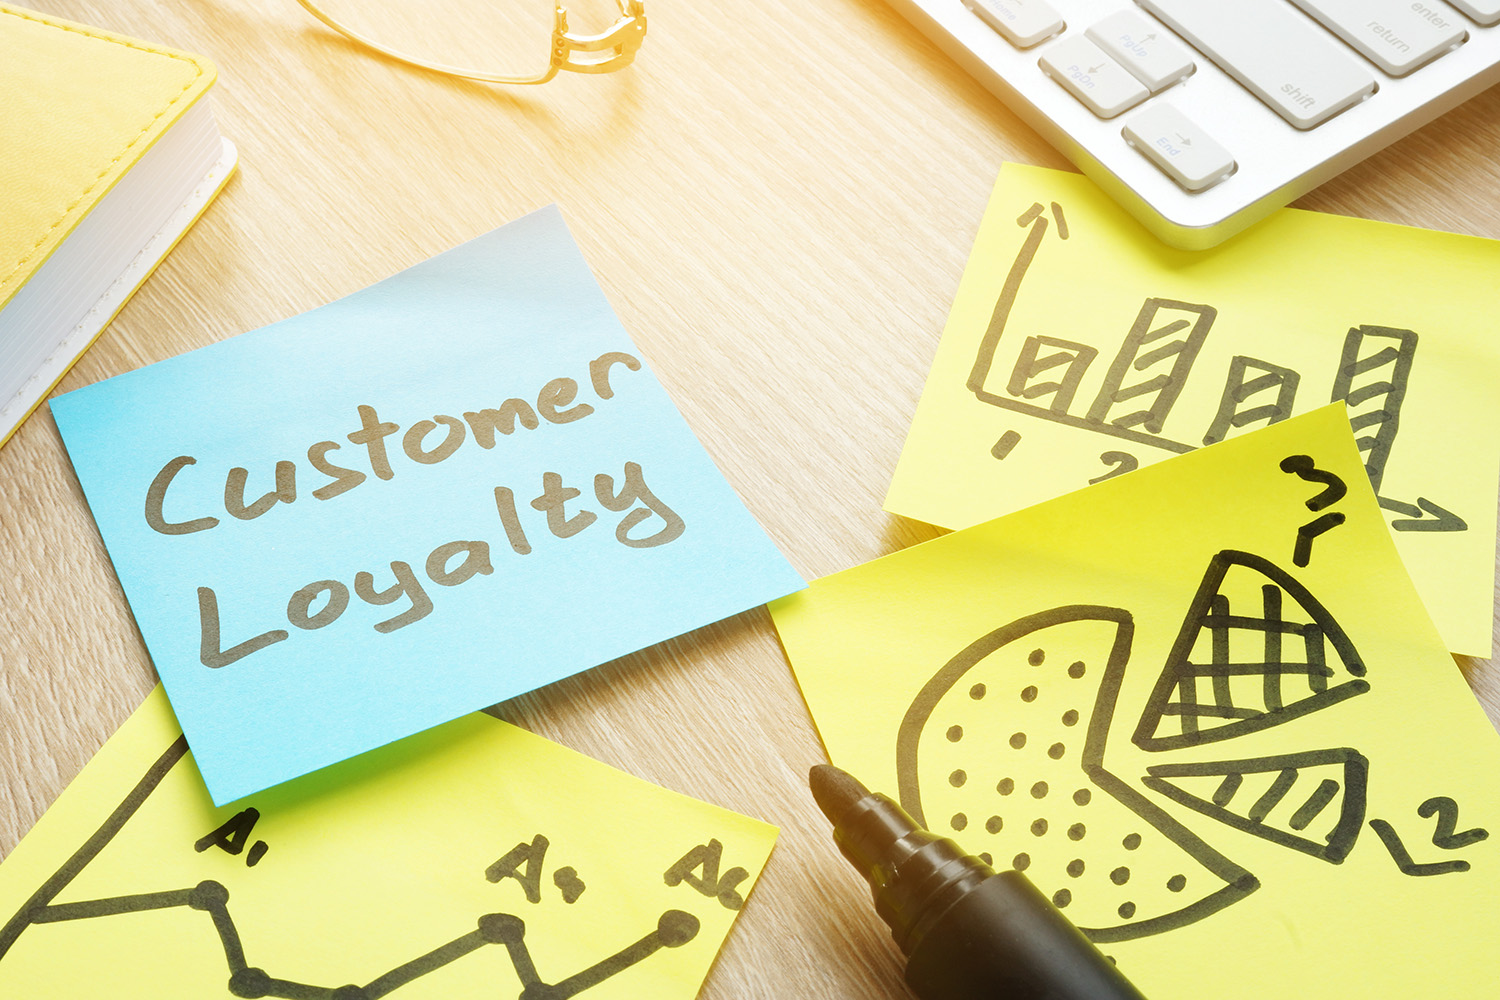 5 Mobile Marketing Tips to Build Customer Loyalty